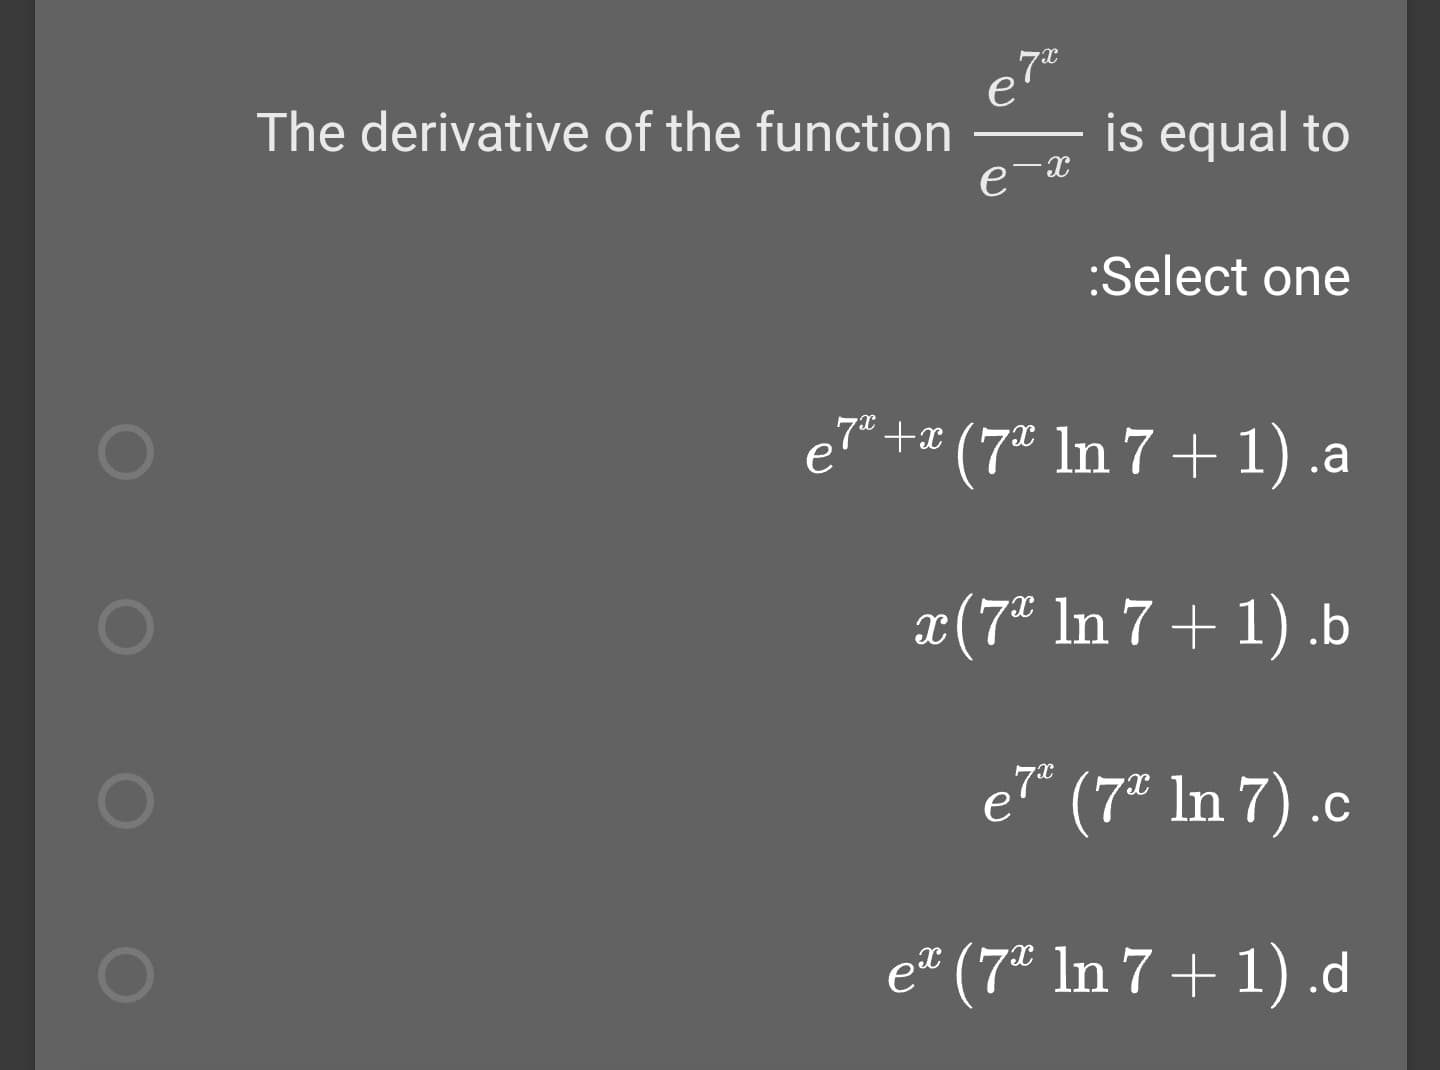 e7
is equal to
The derivative of the function
:Select one
e7" +¤ (7ª In 7 + 1) .a
x(7* In 7 + 1) .b
e" (7* In 7) .c
